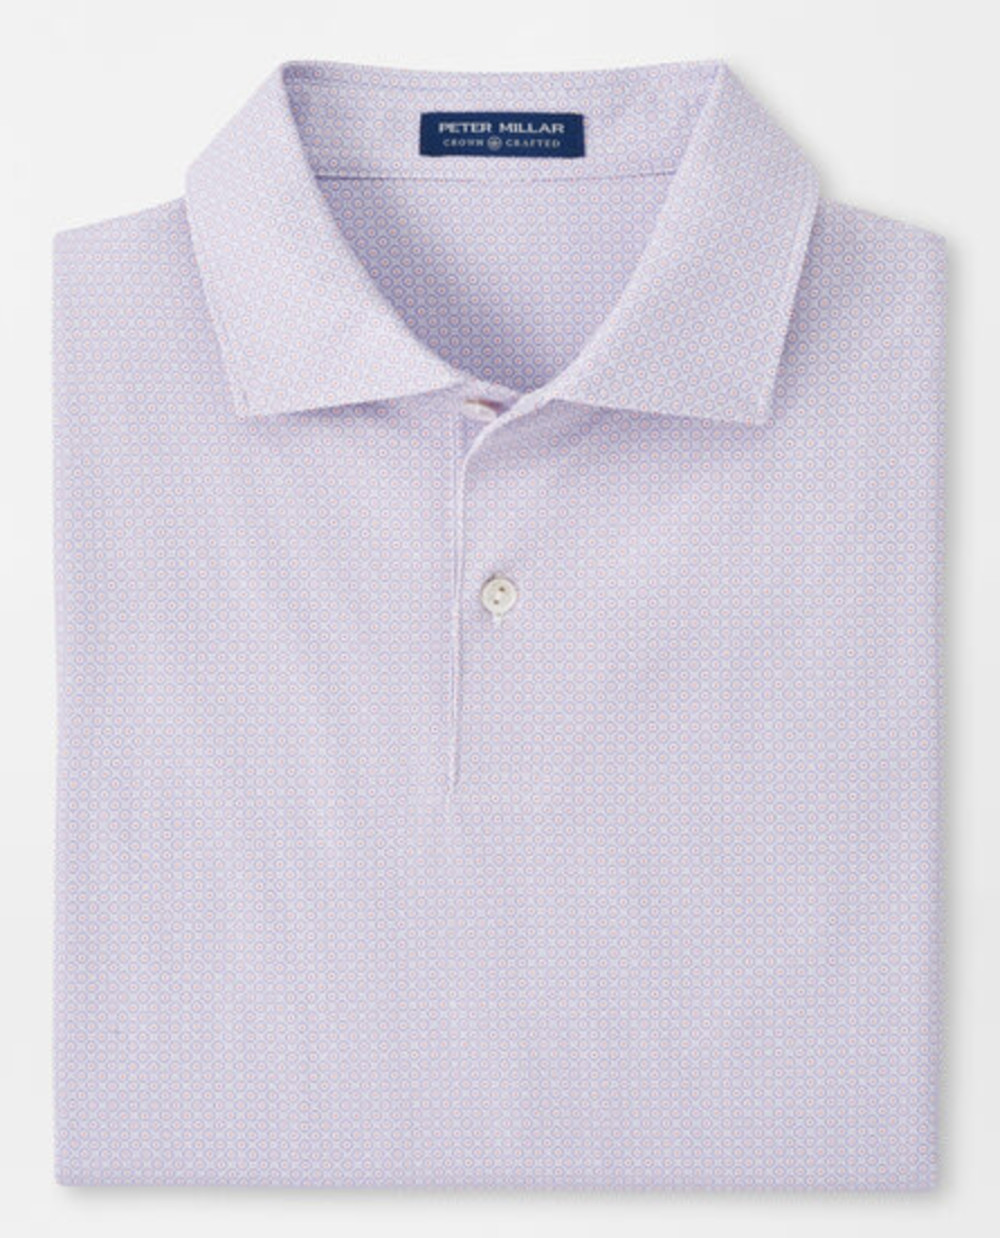 Peter Millar Crown Crafted Polo - Grey Salt Vail